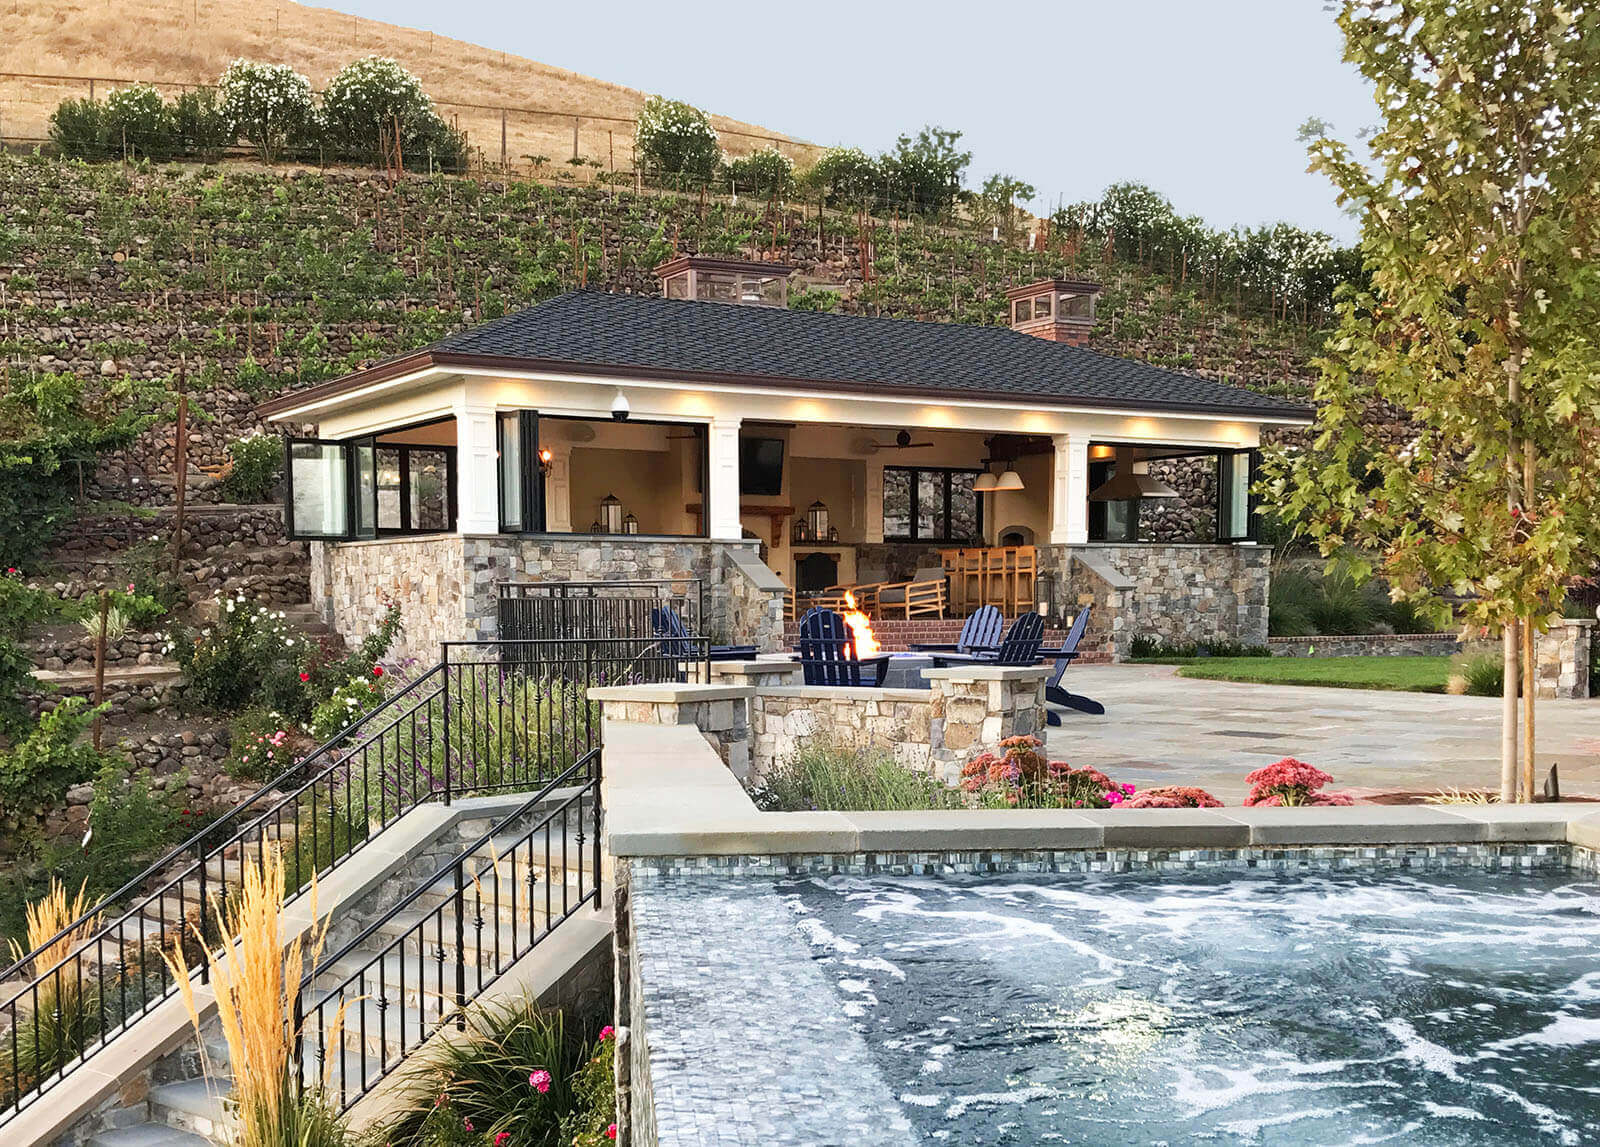 Flowing tile fountain with wrought iron railing on stone terrace, round stone fire pit with Adirondack chairs, and cabana set into hillside